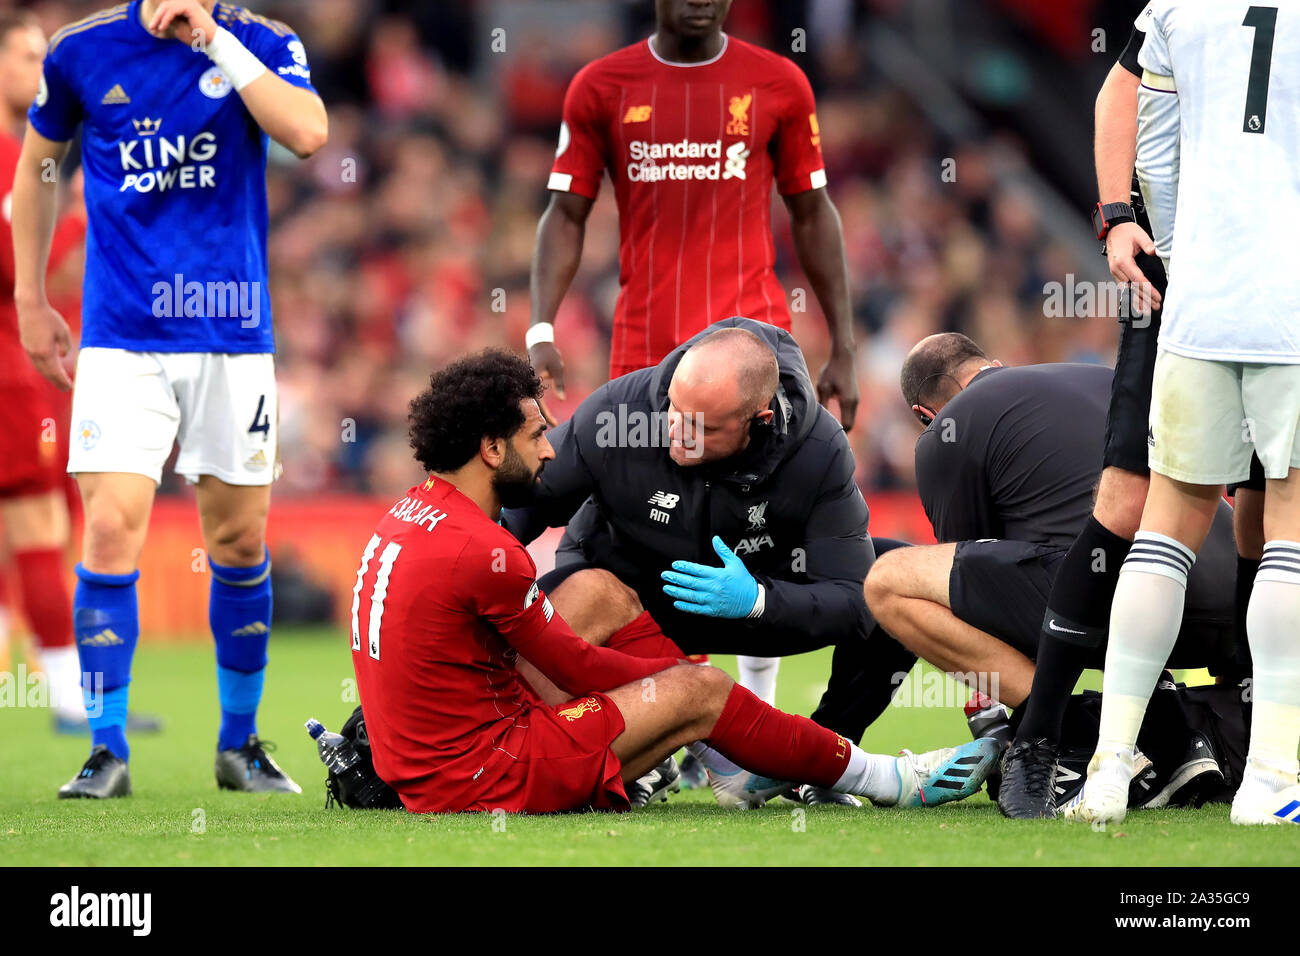 Liverpool's Mohamed Salah sits injured on the pitch after a battle for the ball with Leicester City's Hamza Choudhury (not pictured) during the Premier League match at Anfield, Liverpool. Stock Photo